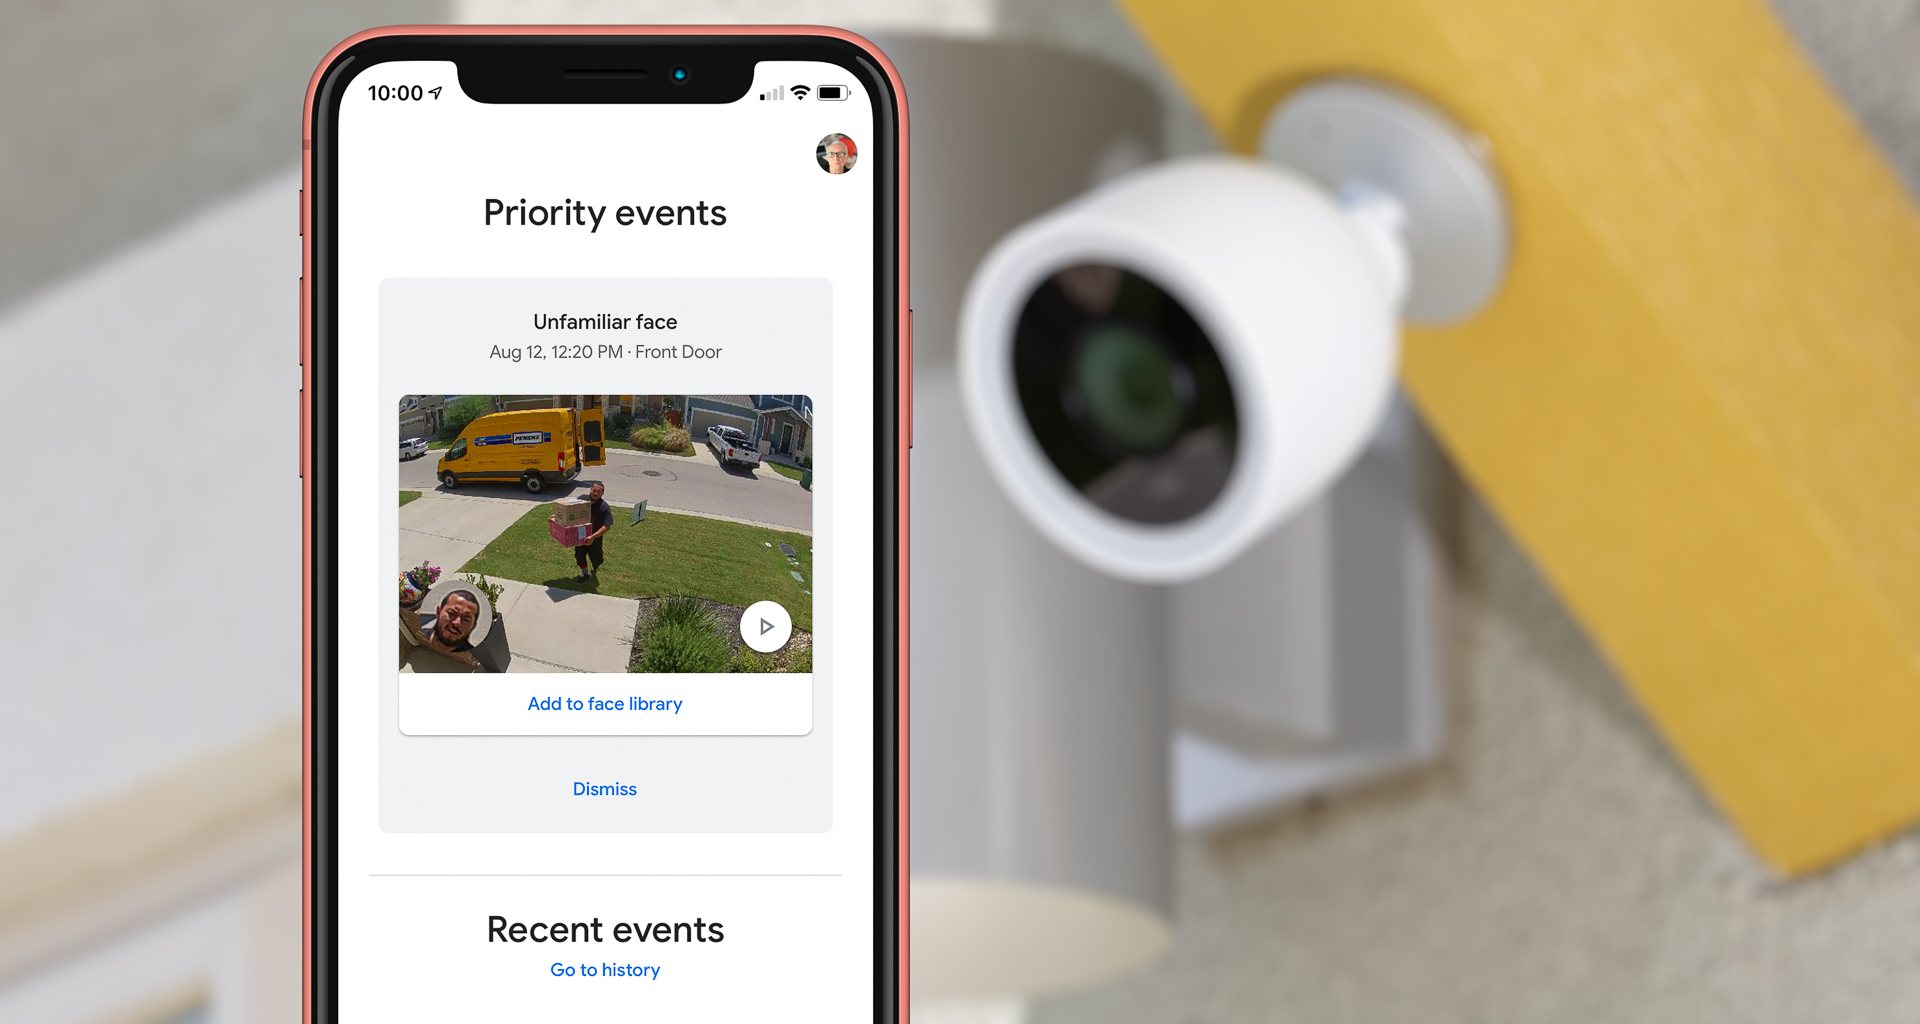 Given a Security cameras, such as this Google Nest Cam IQ, are among the most popular smart home accessories. Image: Digitized House.Security cameras, such as this Google Nest Cam IQ, are among the most popular smart home accessories. Image: Digitized House. between Google and ADT, expect more synergy in connected home security. Image: Digitized House.